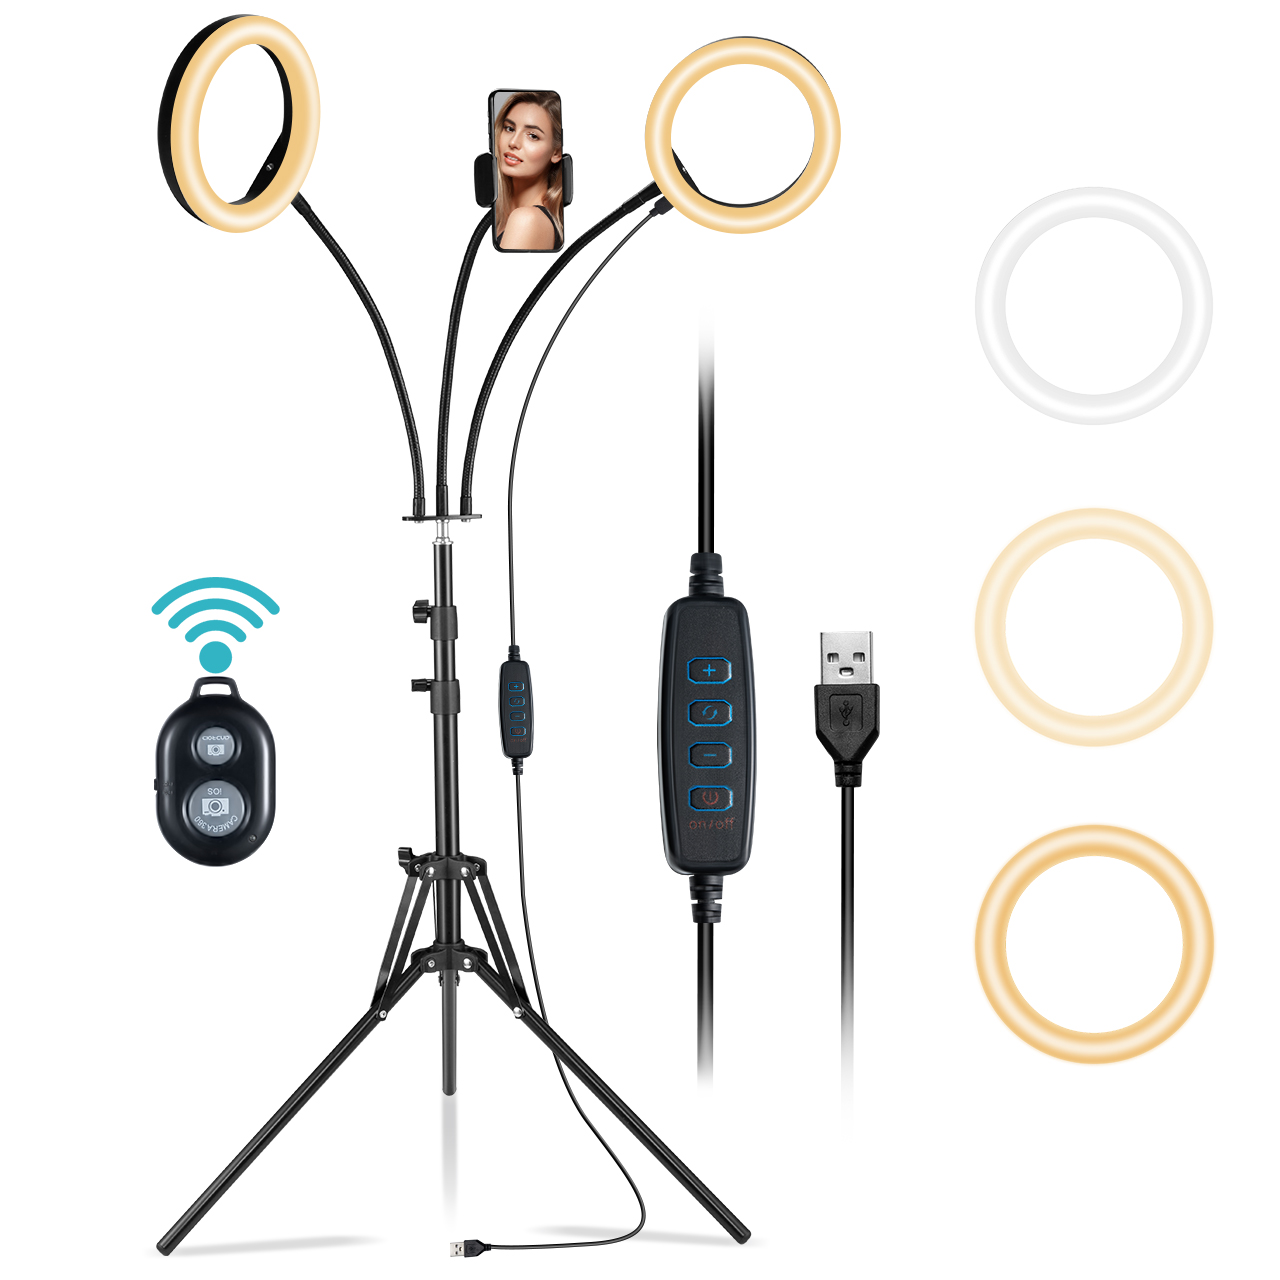 Victsing Double 8" LED Ring Light, Selfie Ring light with Adjustable Tripod & Phone Holder & Remote Shutter for Live Stream, Makeup, Photo - image 1 of 7